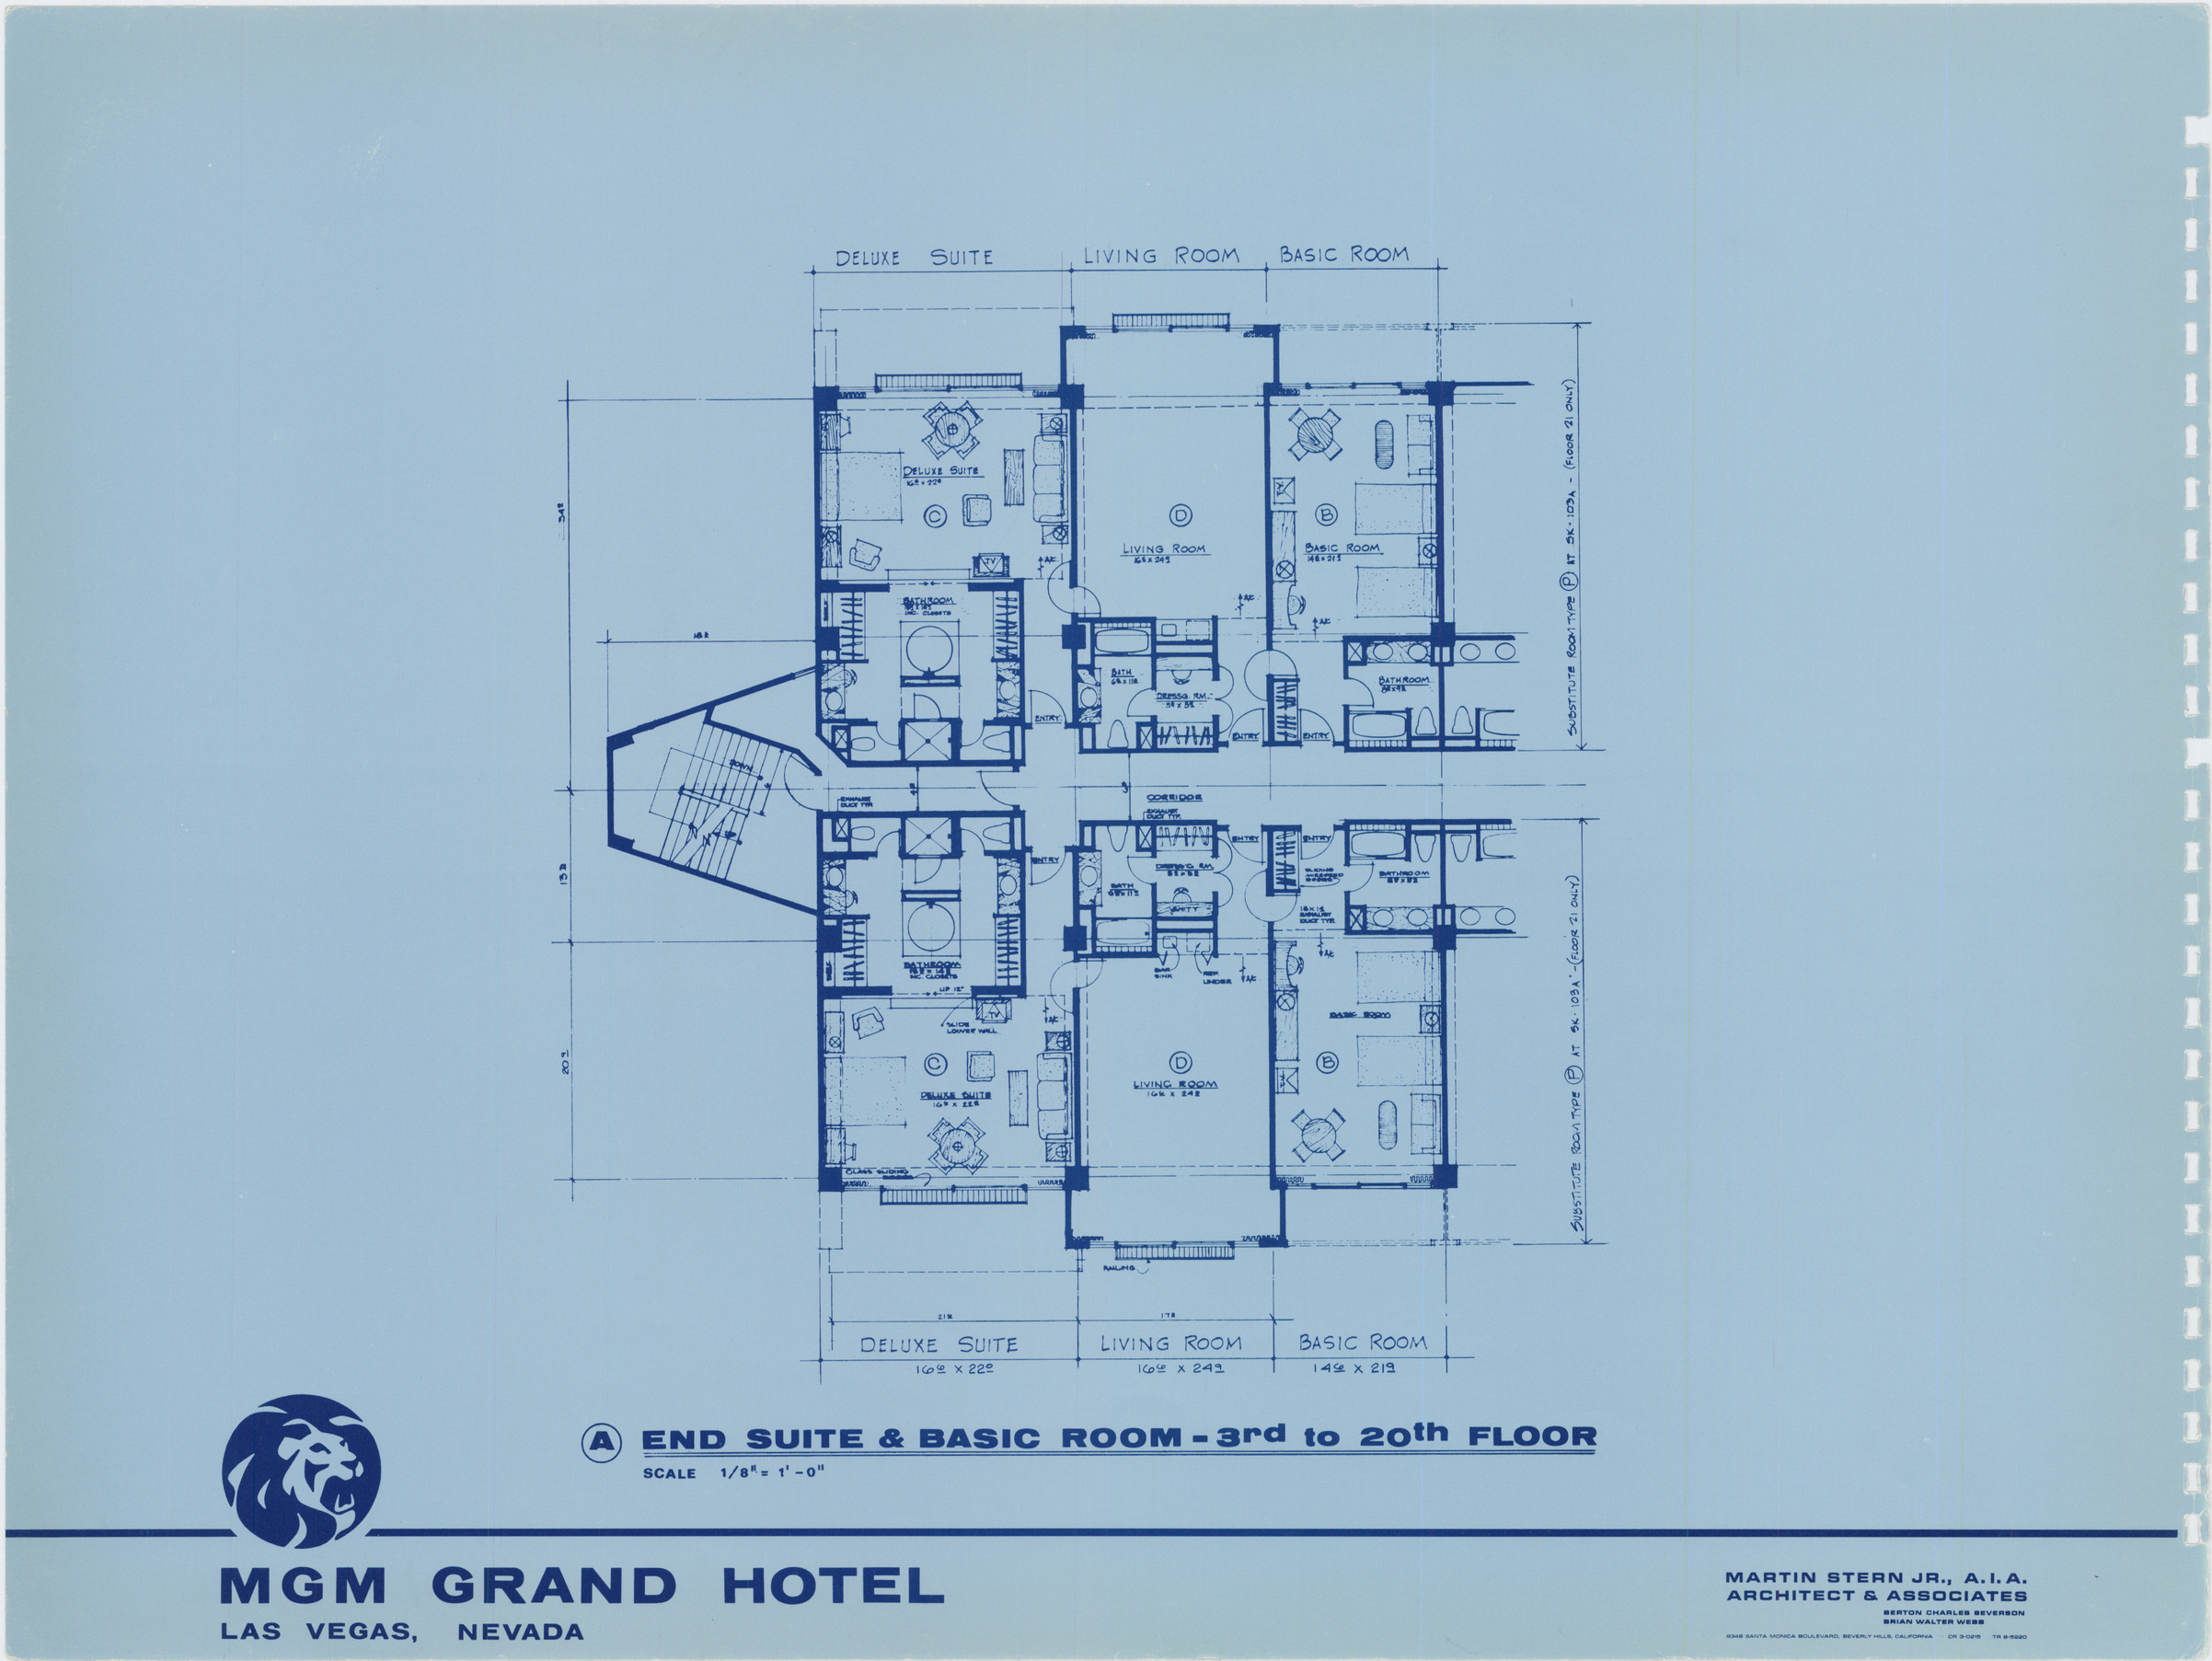 Proposal for the MGM Grand Hotel (Las Vegas), circa 1972, image 13